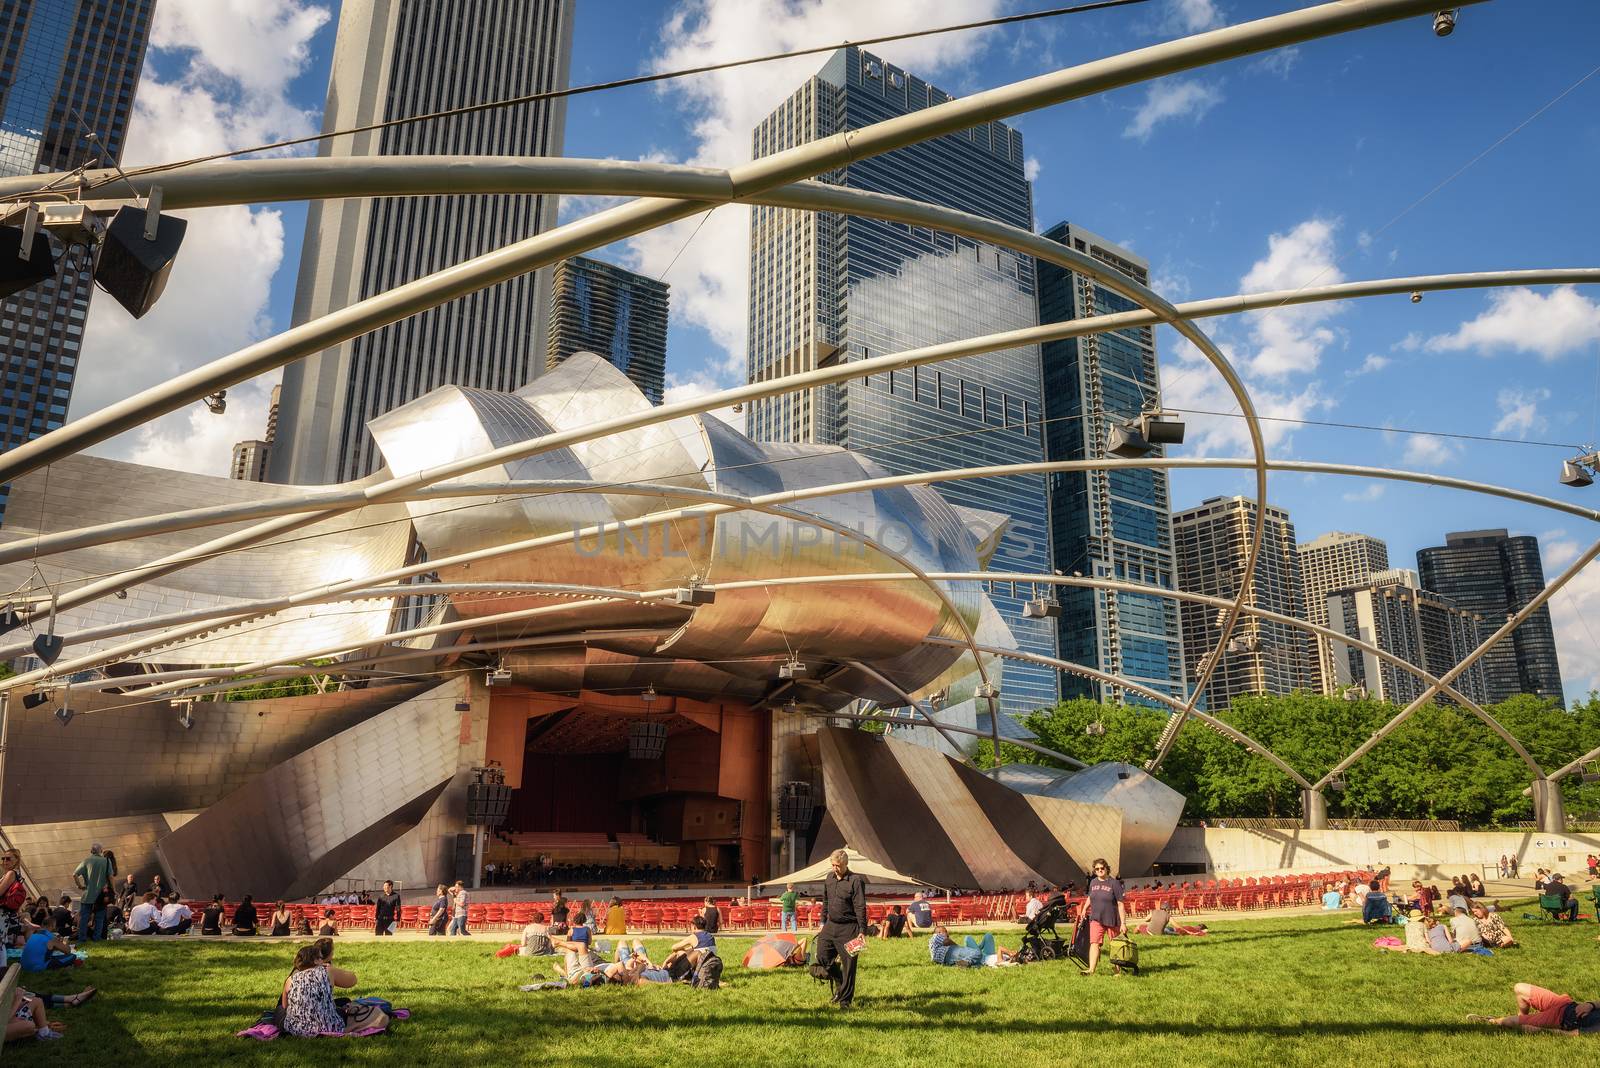 Jay Pritzker Pavilion in Millennium Park in Chicago, Illinois by nickfox